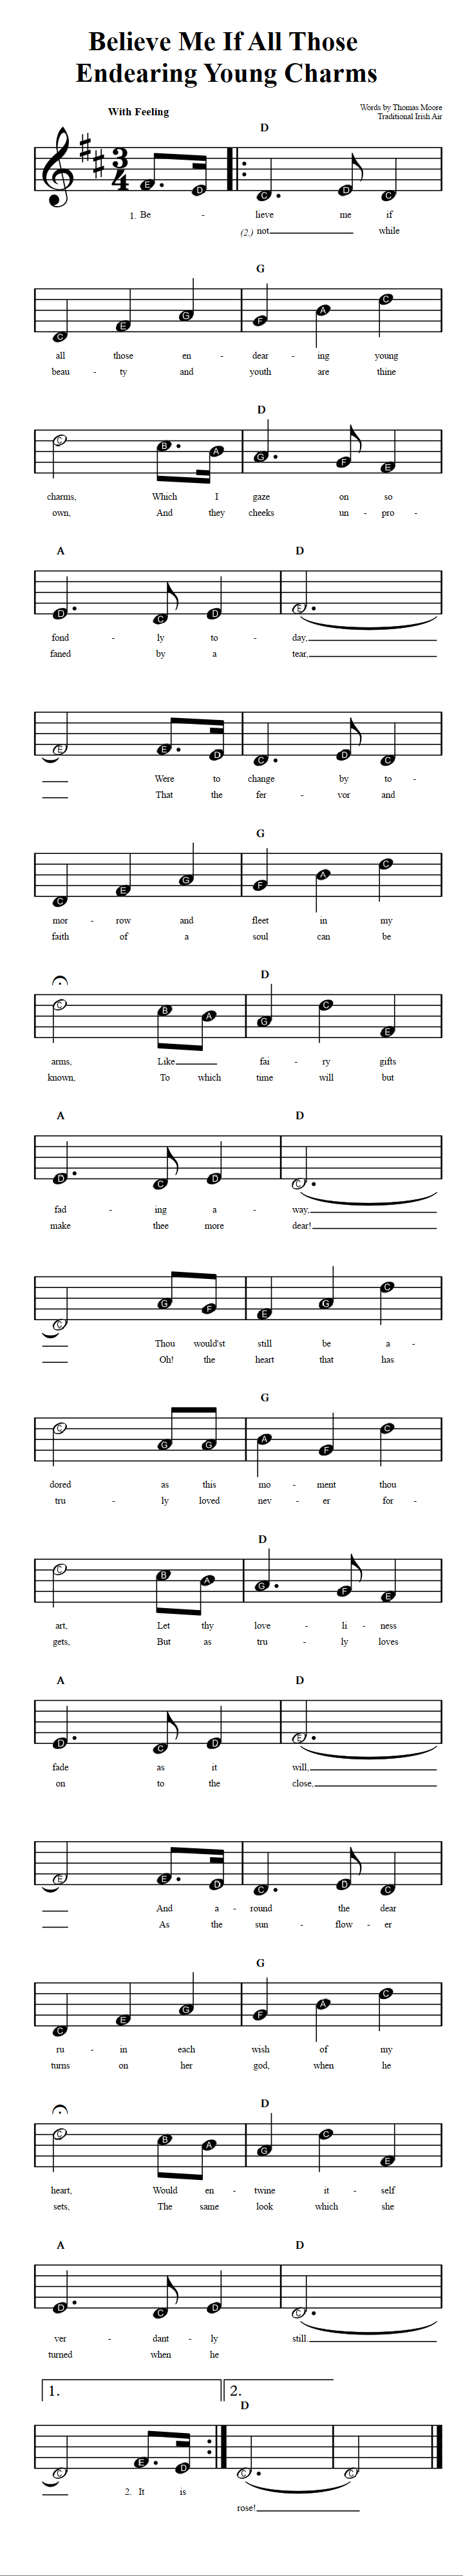 Believe Me If All Those Endearing Young Charms  Beginner Sheet Music